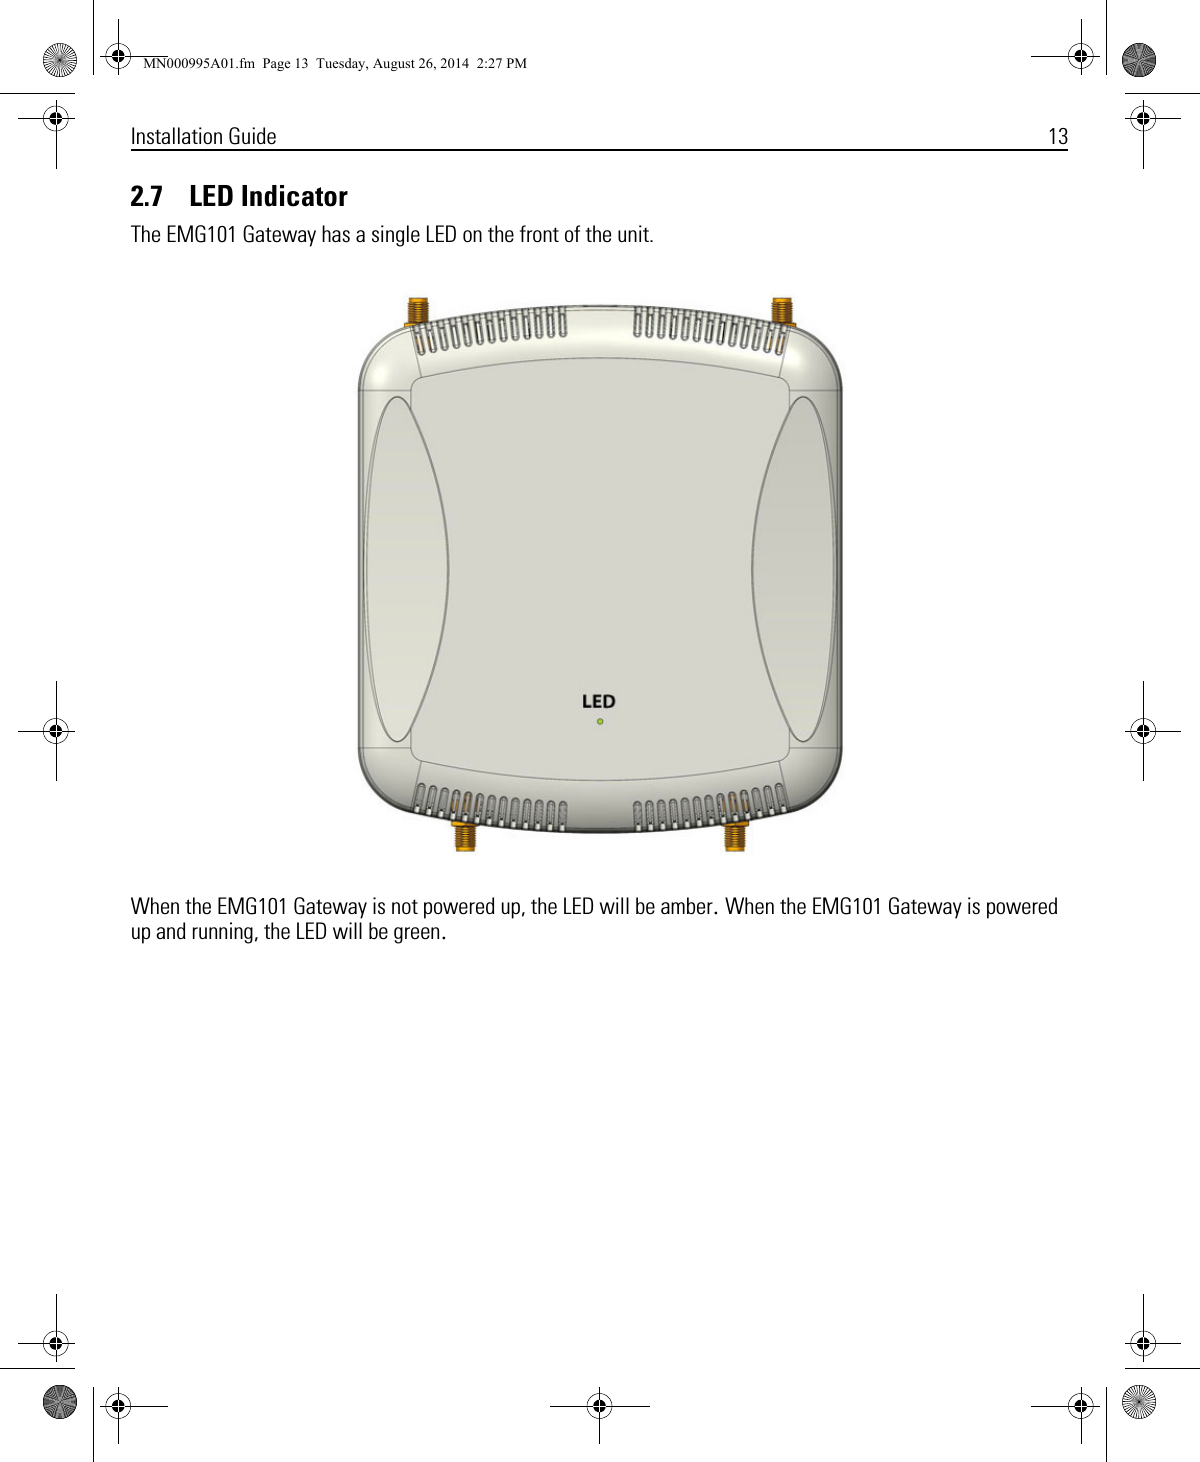 Installation Guide 132.7    LED IndicatorThe EMG101 Gateway has a single LED on the front of the unit.When the EMG101 Gateway is not powered up, the LED will be amber. When the EMG101 Gateway is powered up and running, the LED will be green. MN000995A01.fm  Page 13  Tuesday, August 26, 2014  2:27 PM